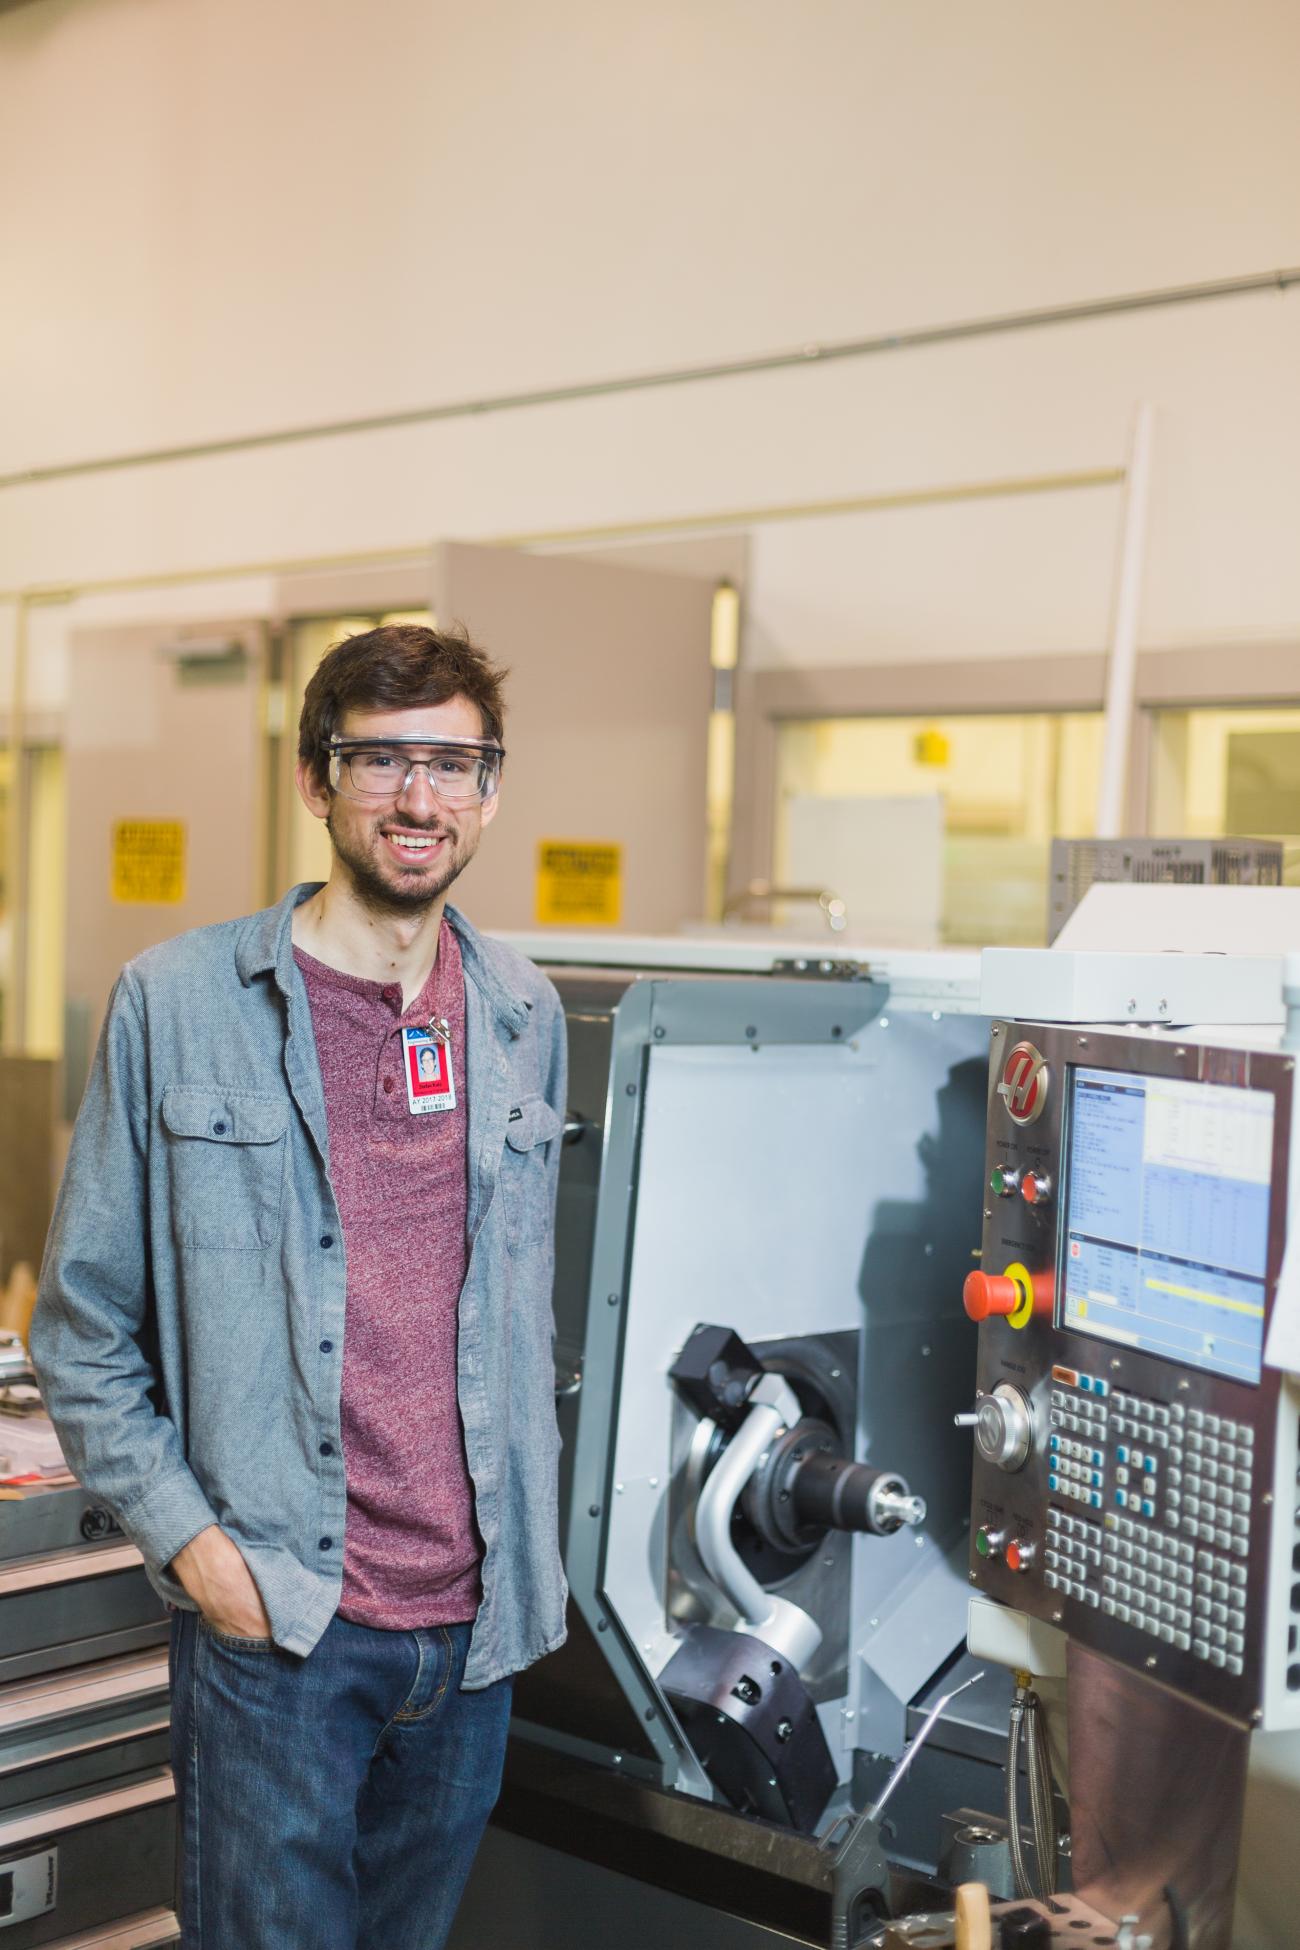 A Manufacturing Student standing next to a machine